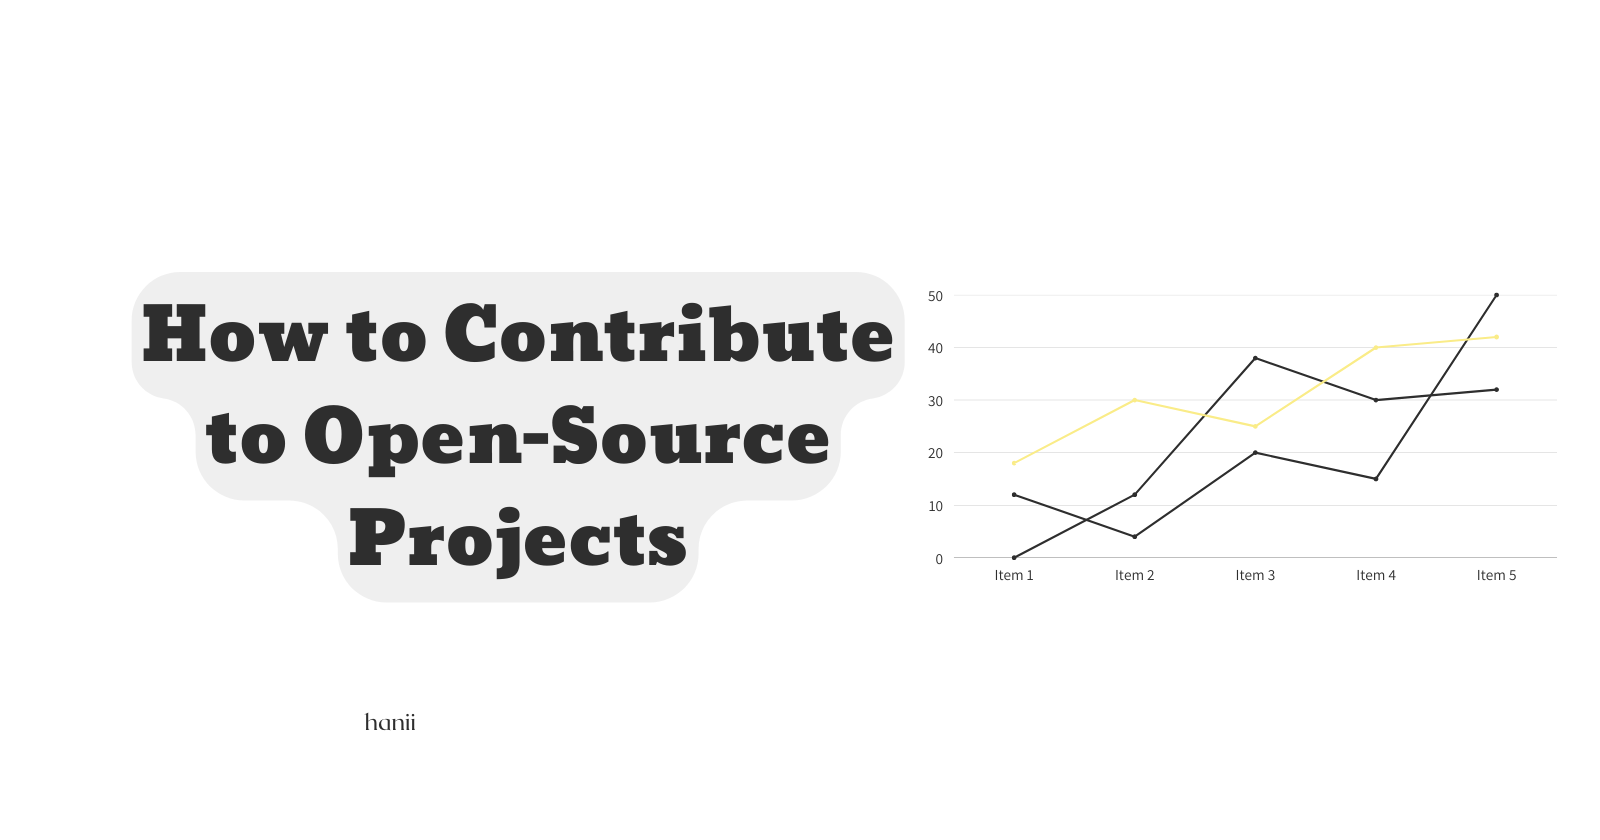 How to Contribute to Open-Source Projects